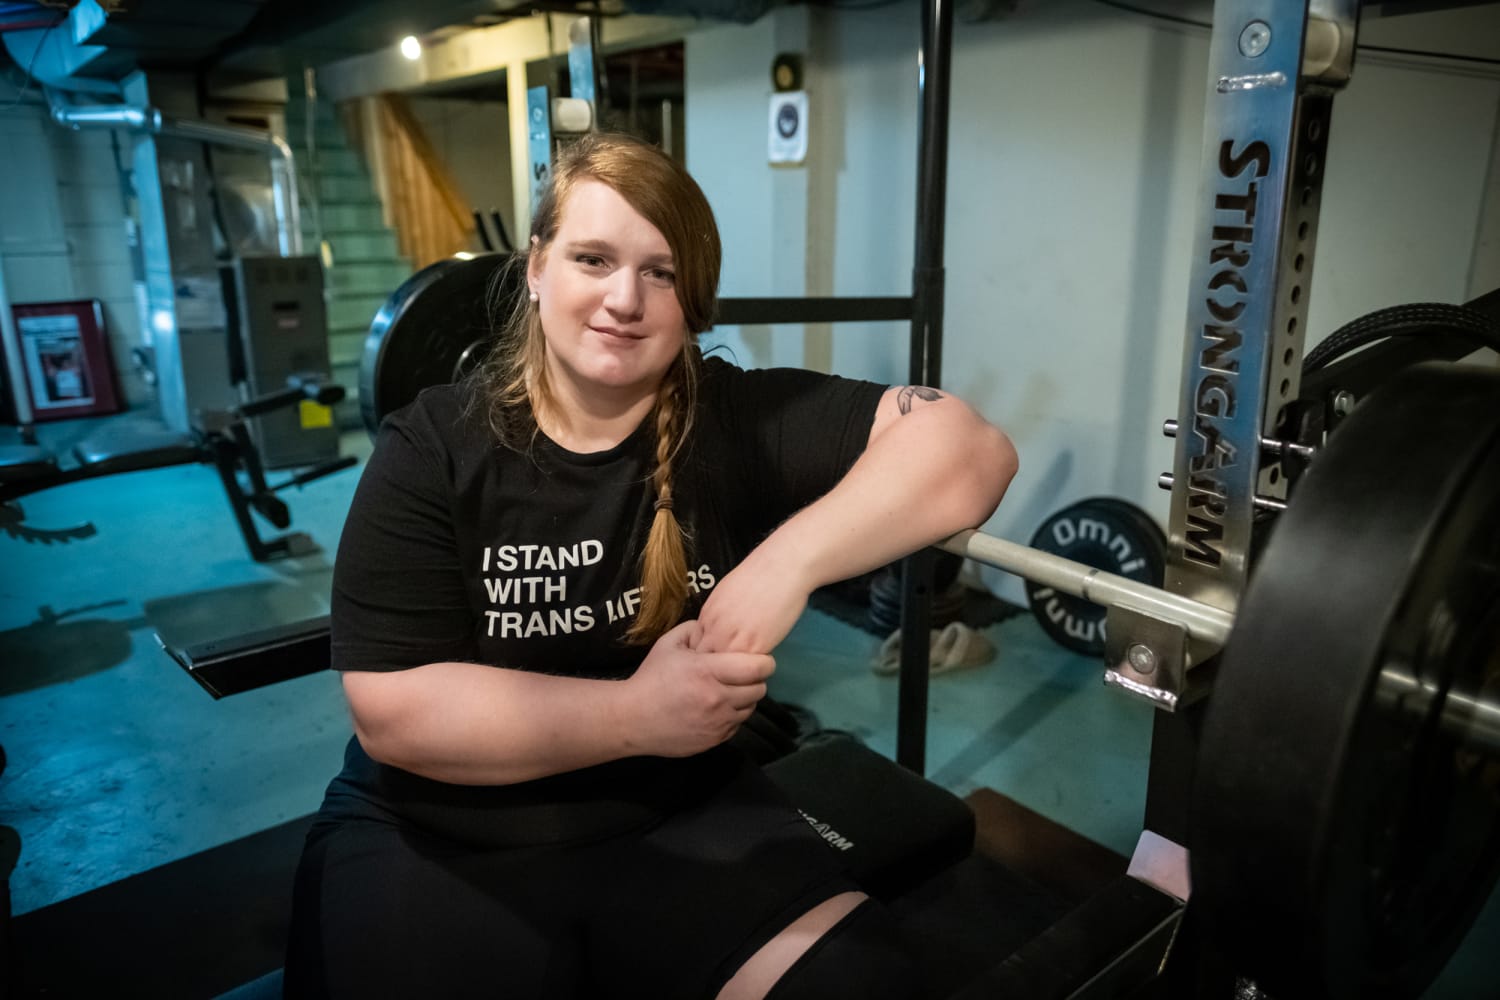 Stuck on the sidelines: A transgender powerlifter fights for the right to  compete